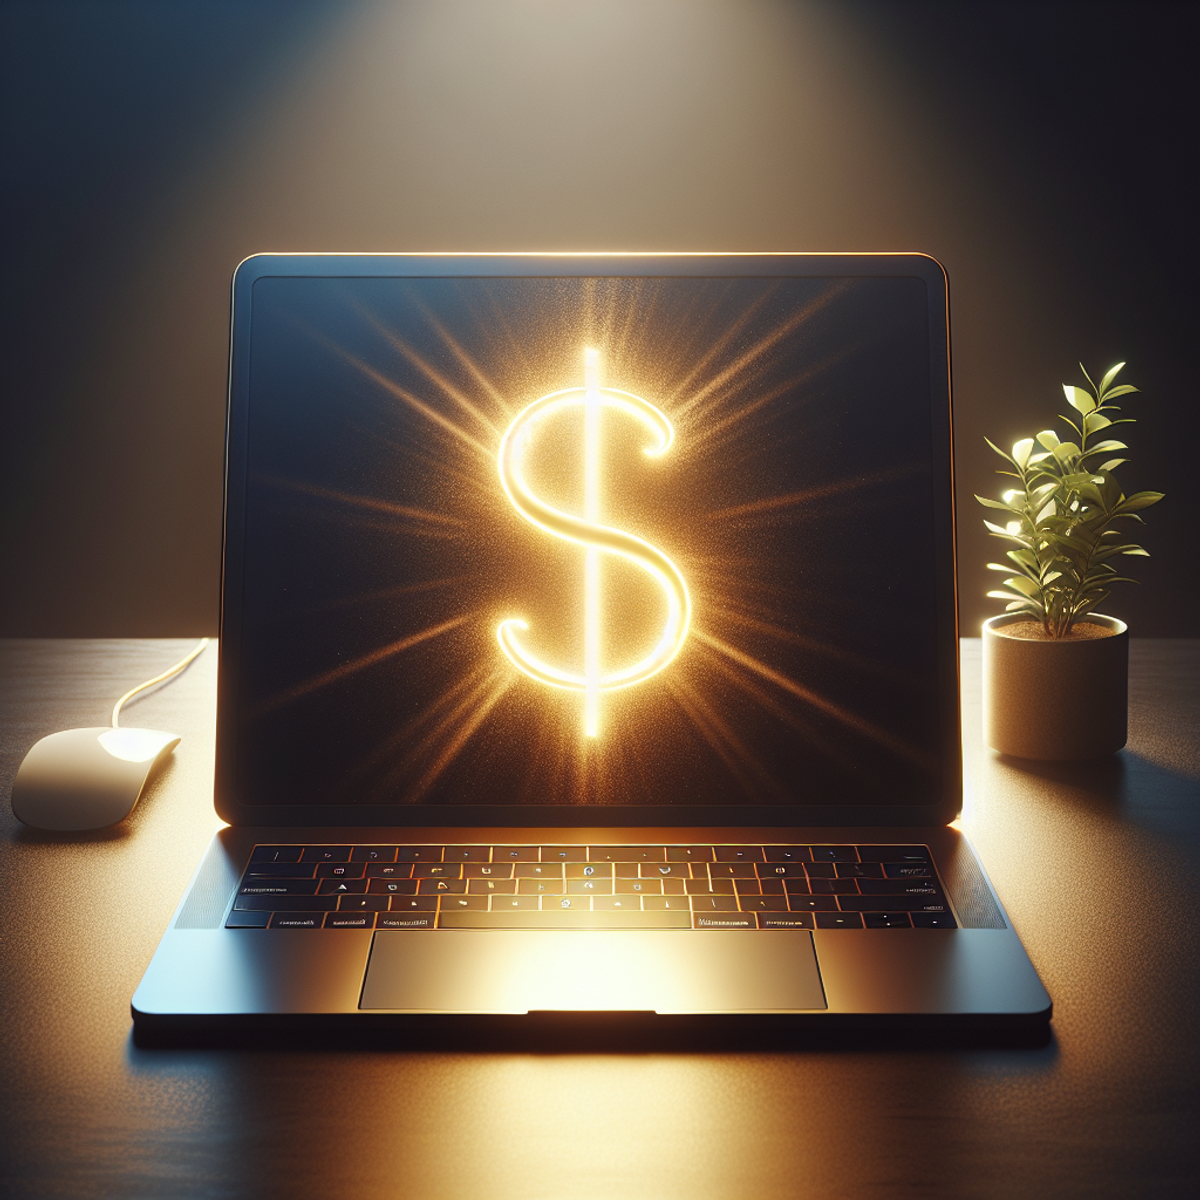 Open laptop on desk with glowing gold dollar sign on screen, surrounded by minimalistic items.